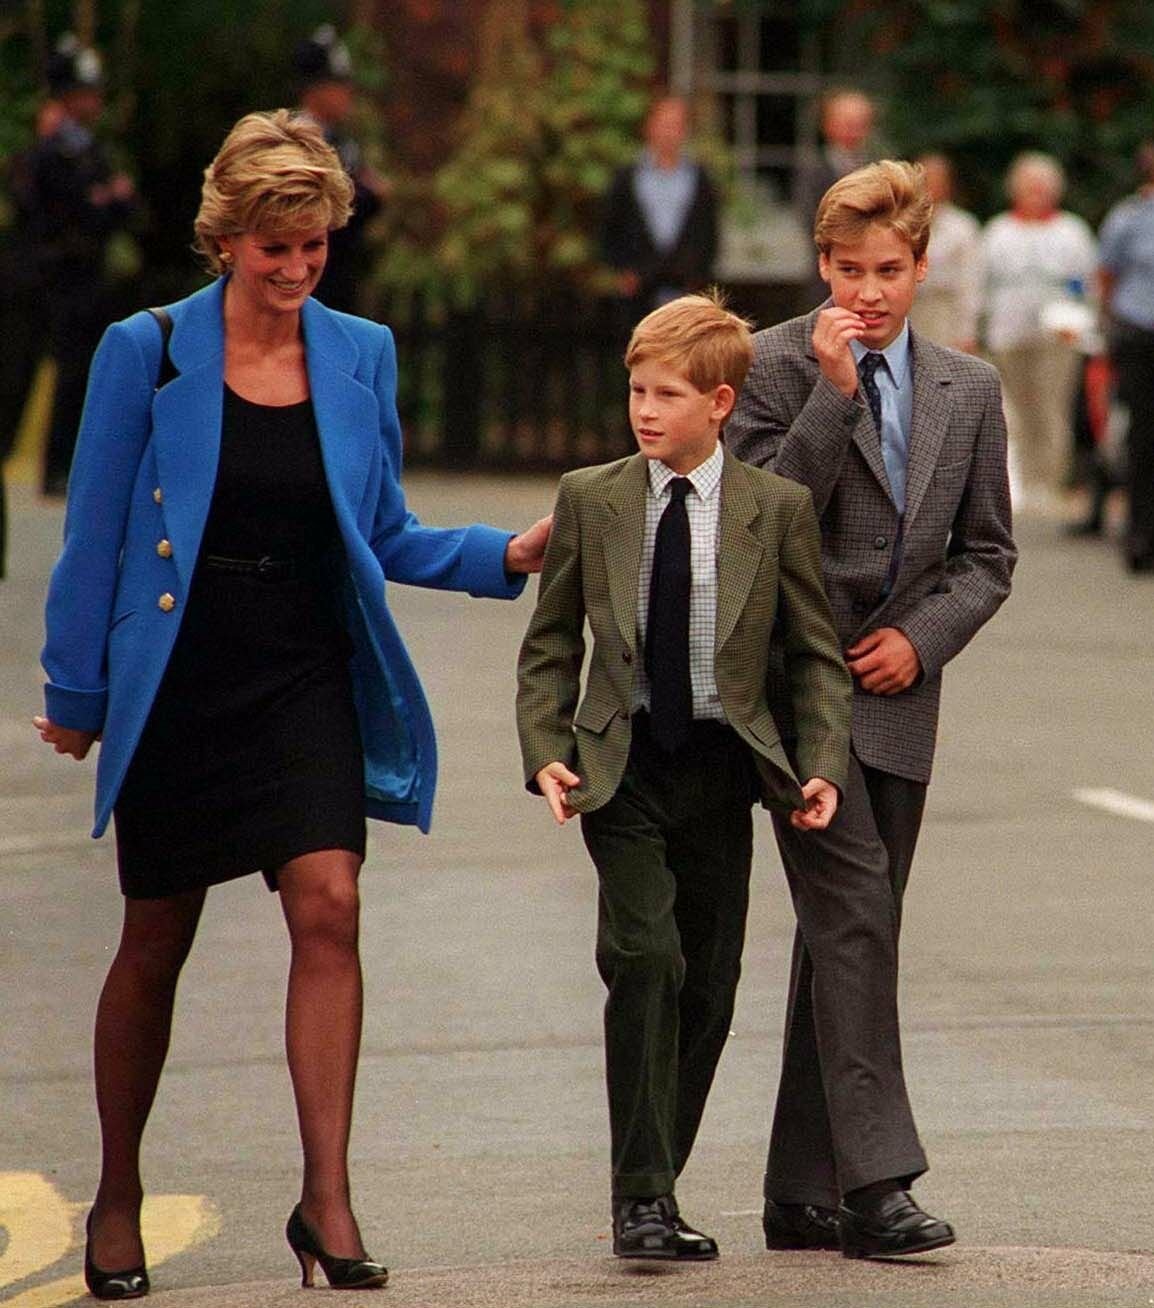 Prince William arrives with Princess Diana and Prince Harry for his first day at Eton College on September 16, 1995 in Windsor, England | Source: Getty Images